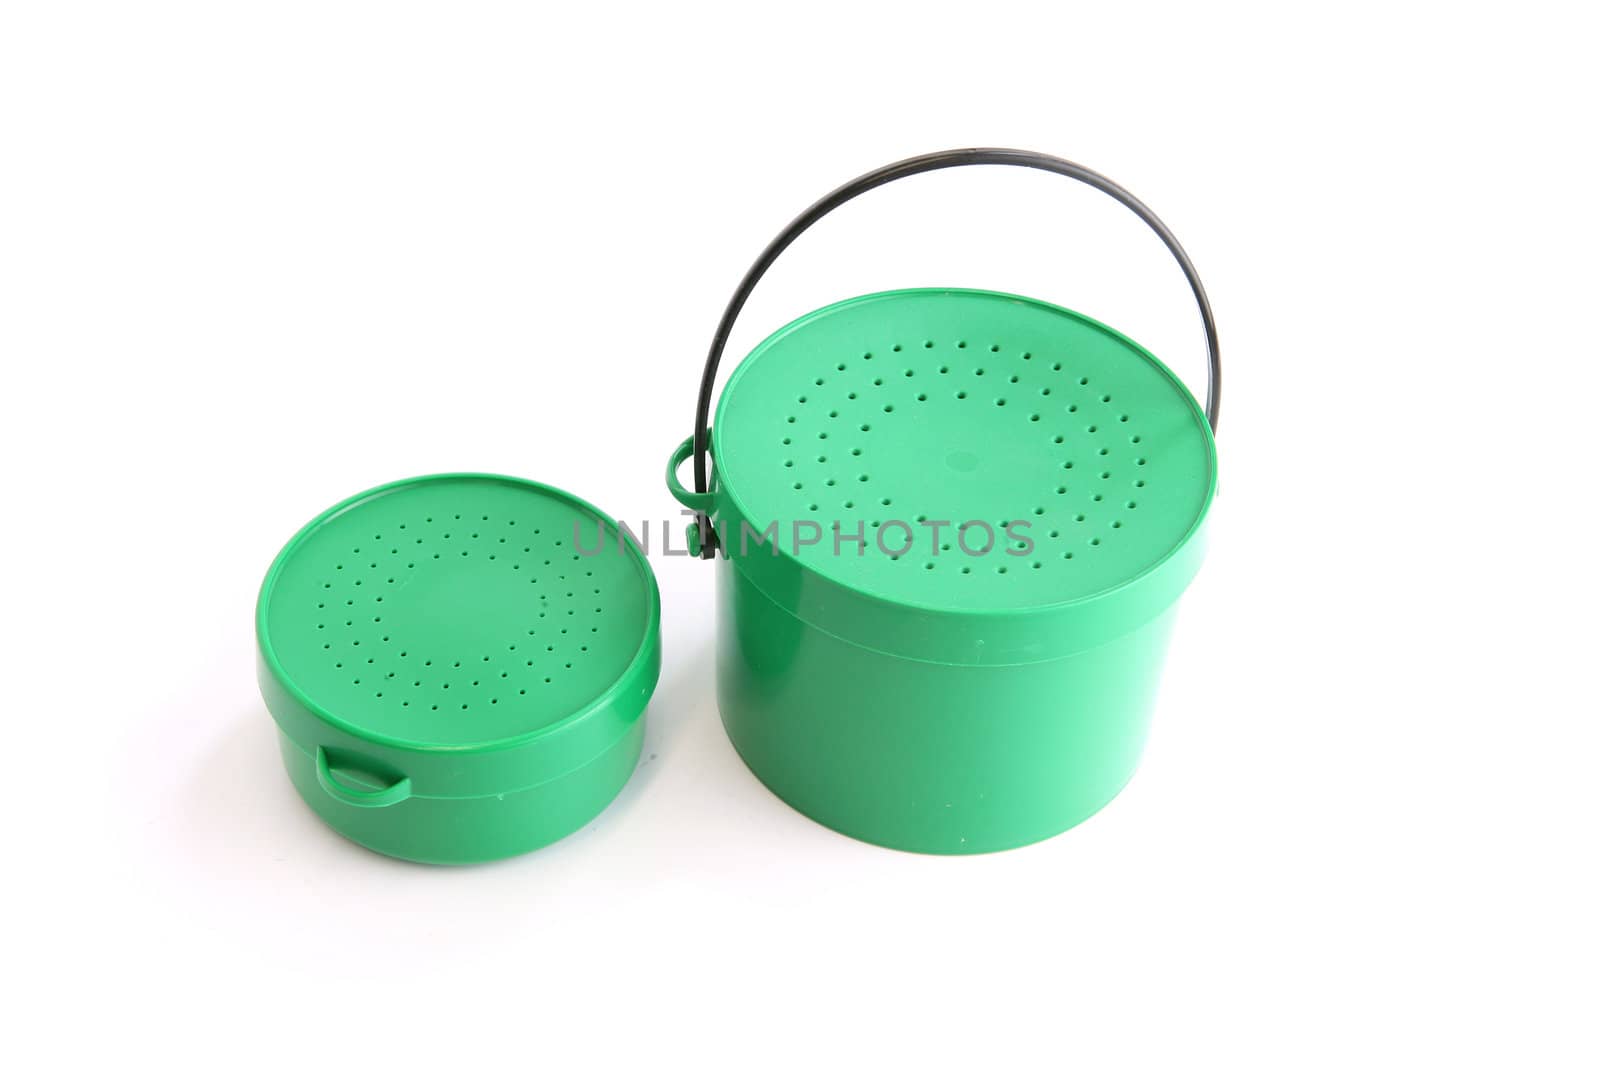 Two green tins with perforated lids by phovoir